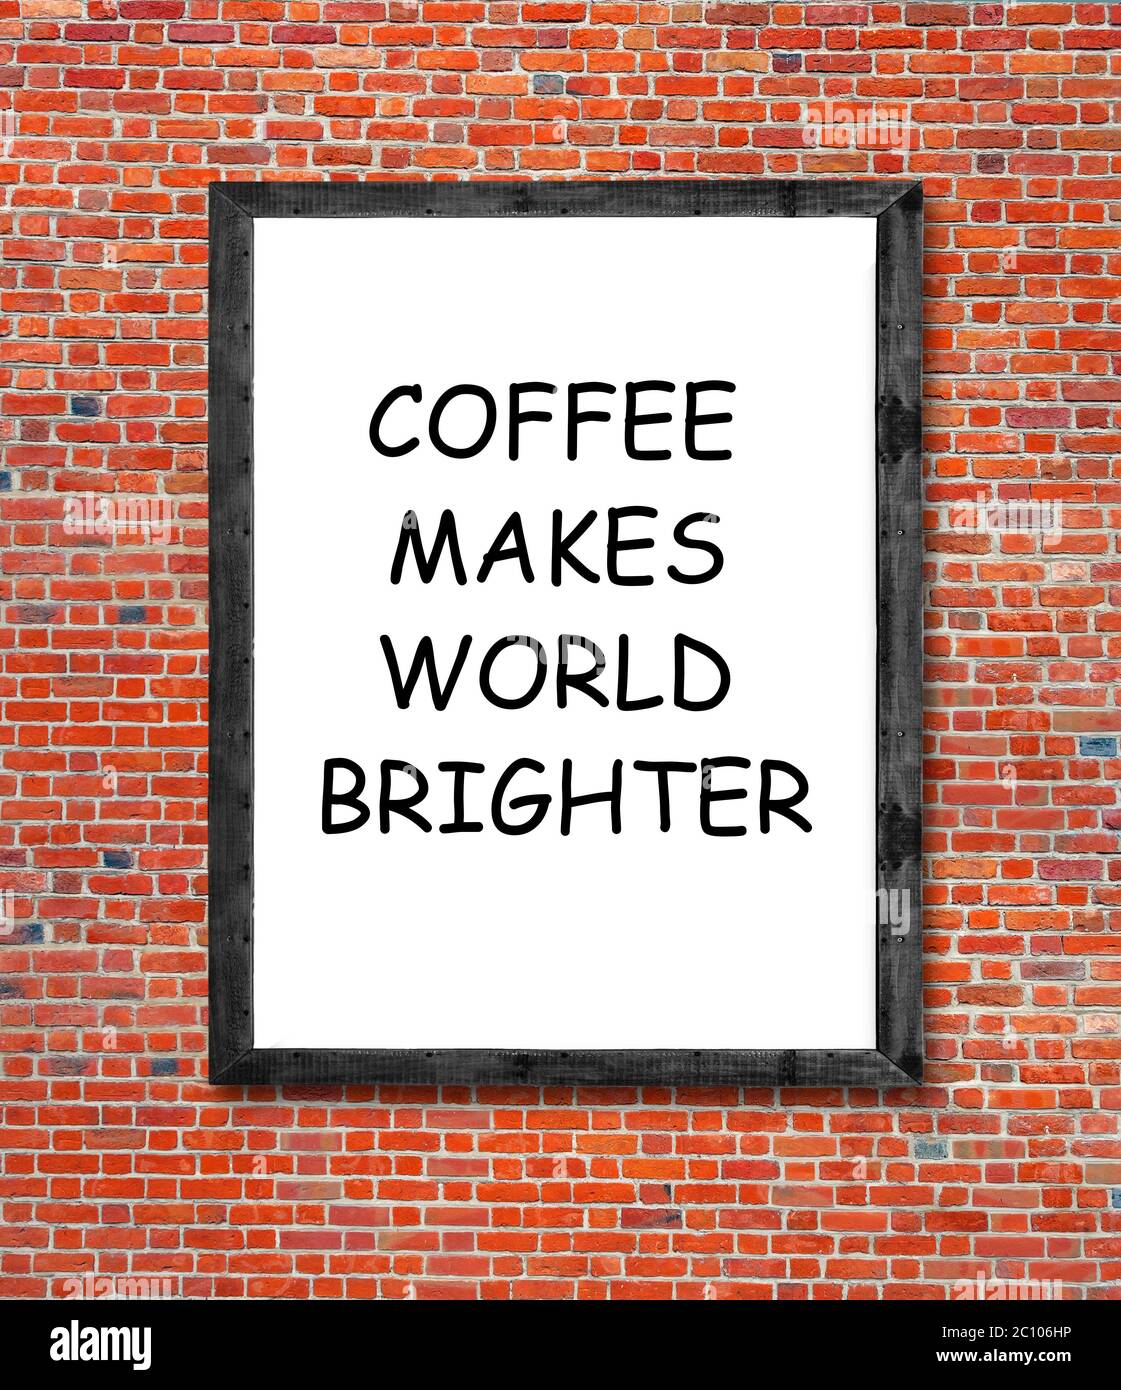 Coffee makes world brighter written in picture frame Stock Photo